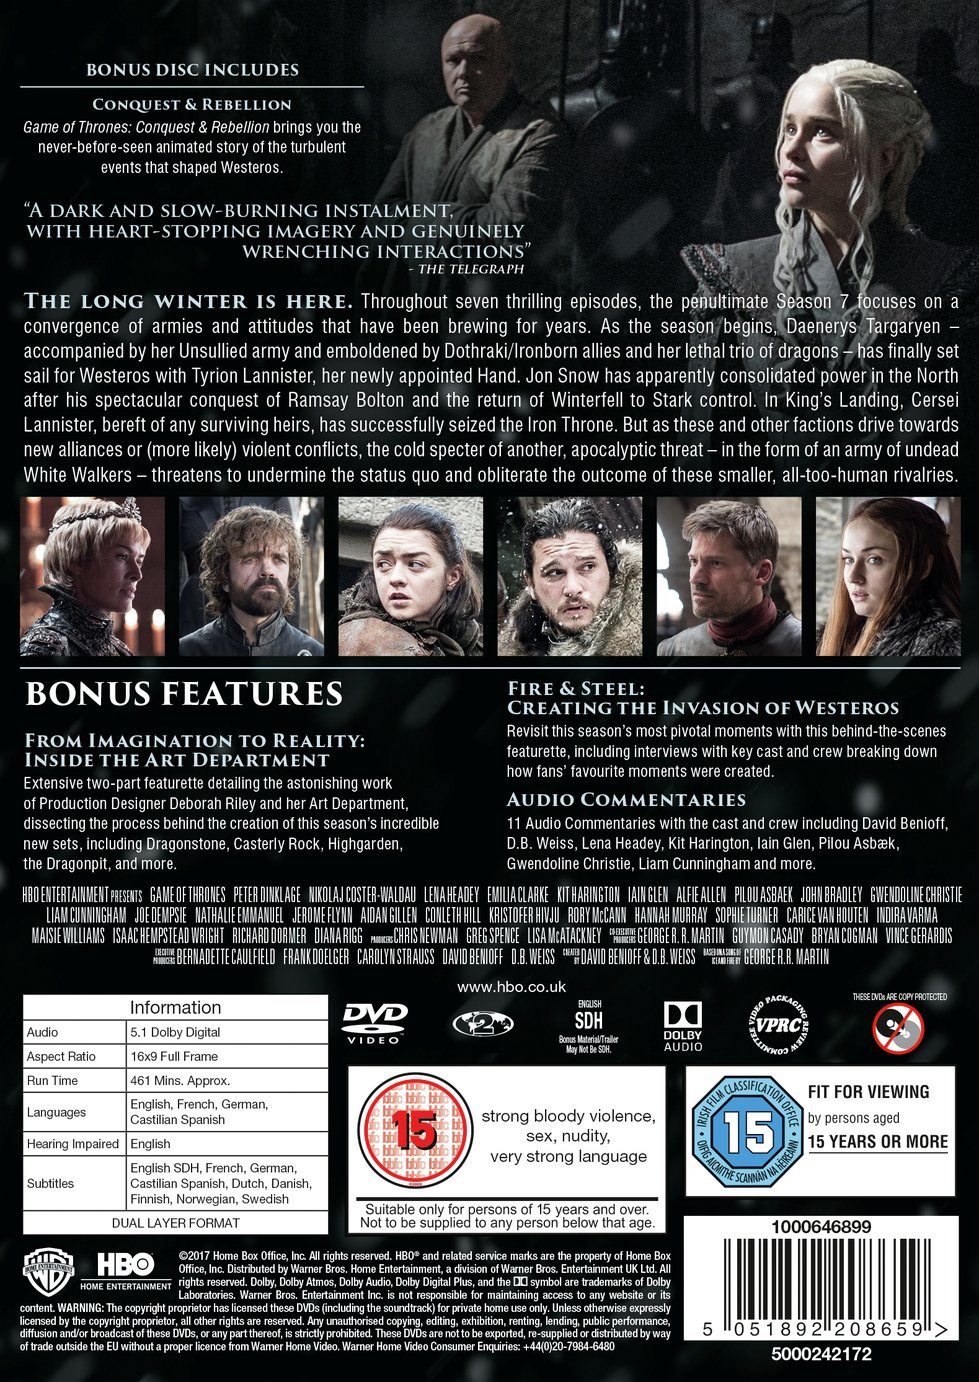 Game of Thrones: Season 7 DVD Review